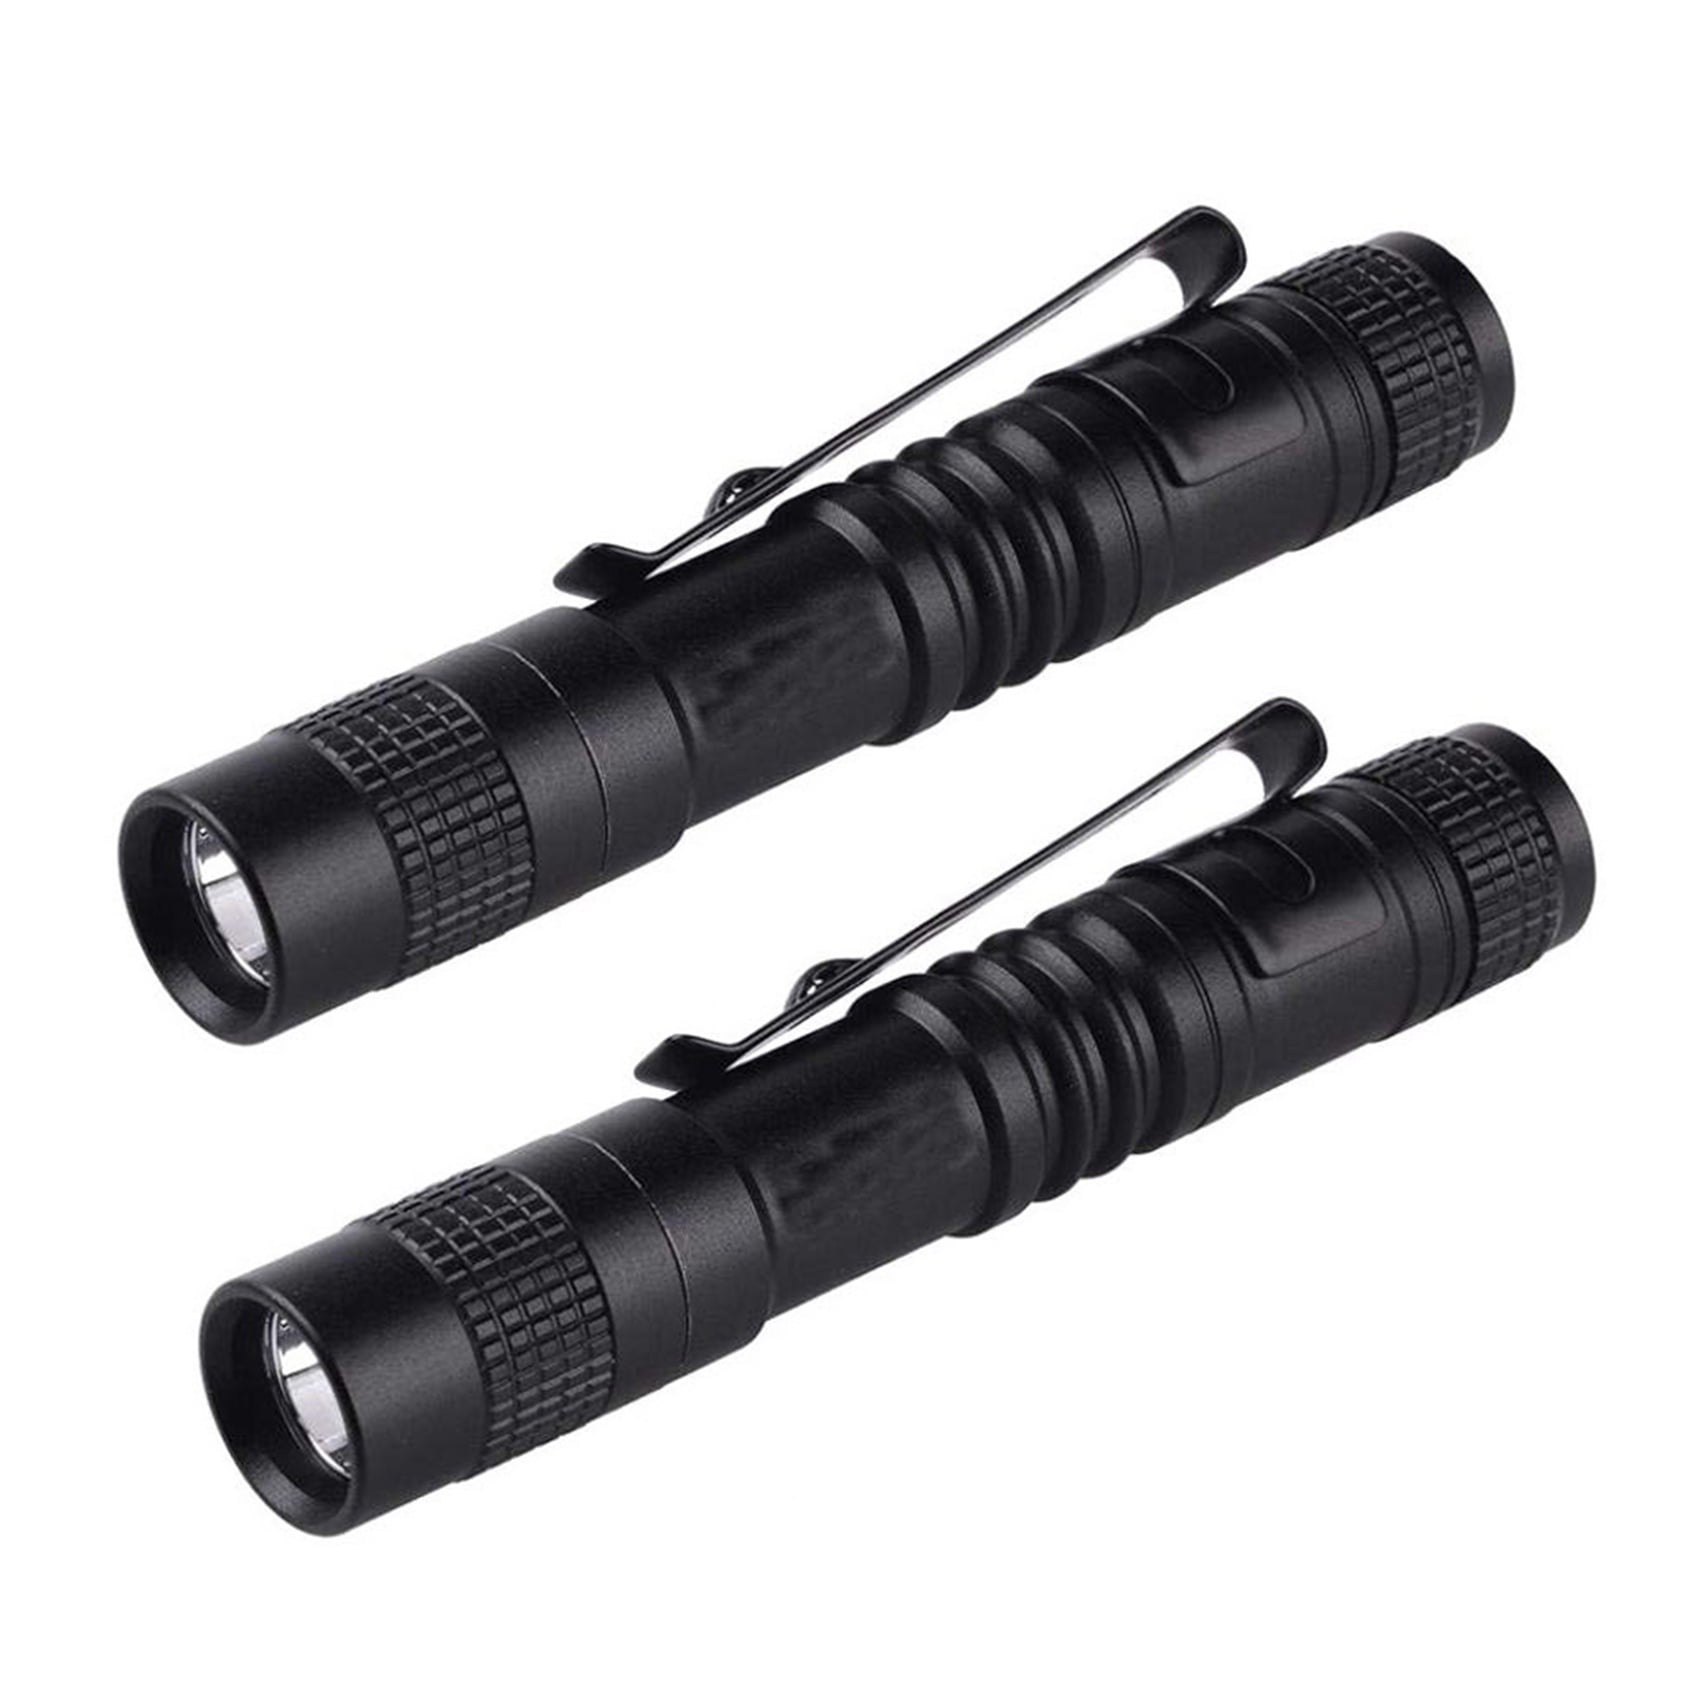 20000LM Portable Mini LED Flashlight Torch Lamp Light Outdoor AAA Battery  BE 